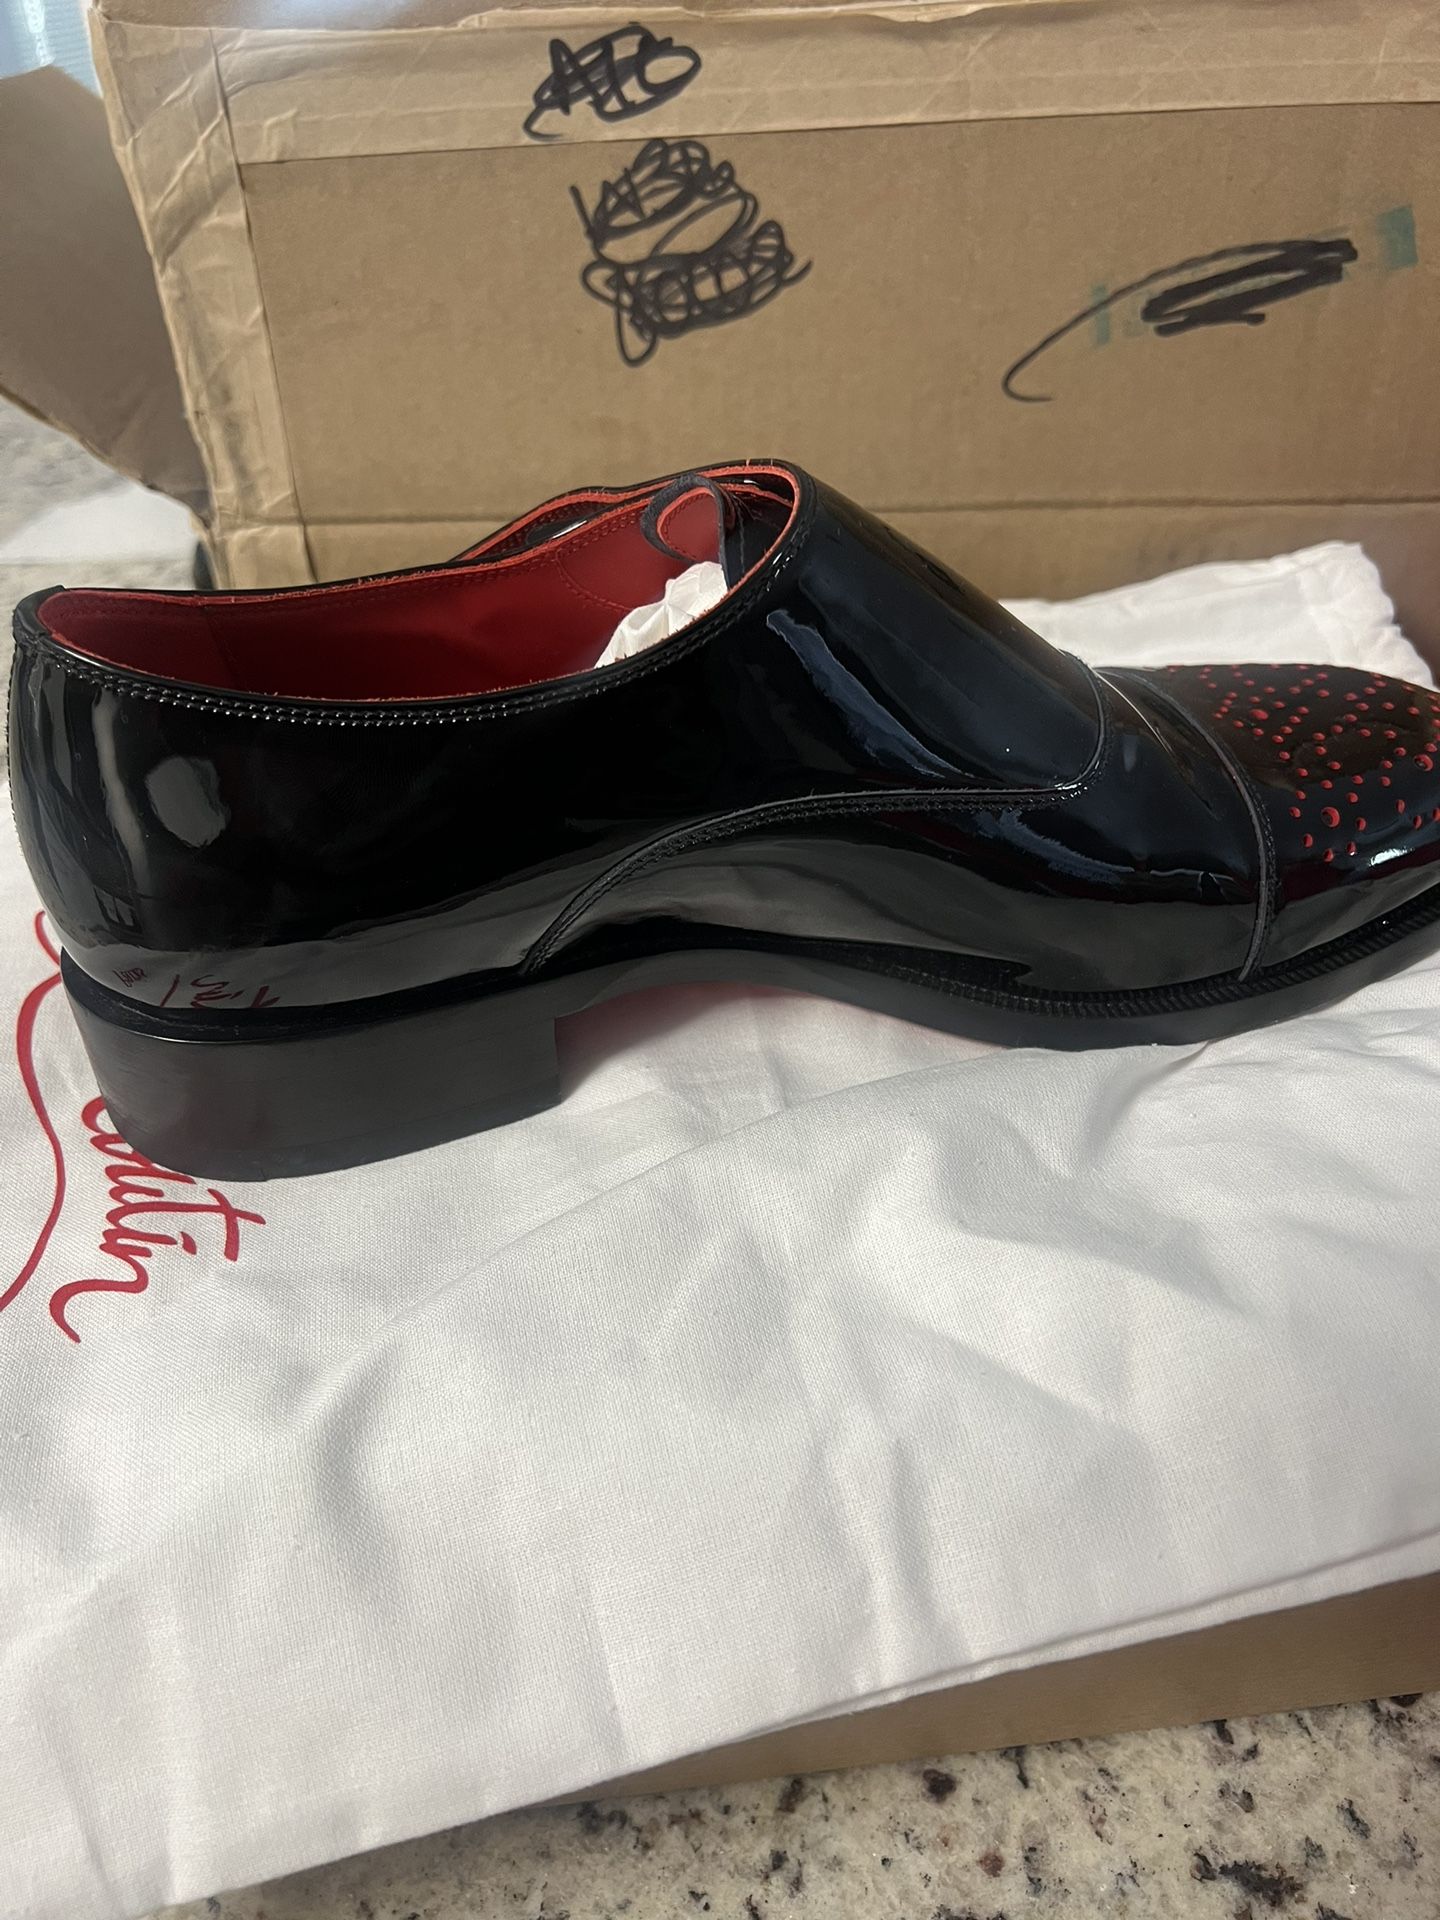 Christian Louboutin Men Dress Shoes Size 8'5 for Sale in Orlando